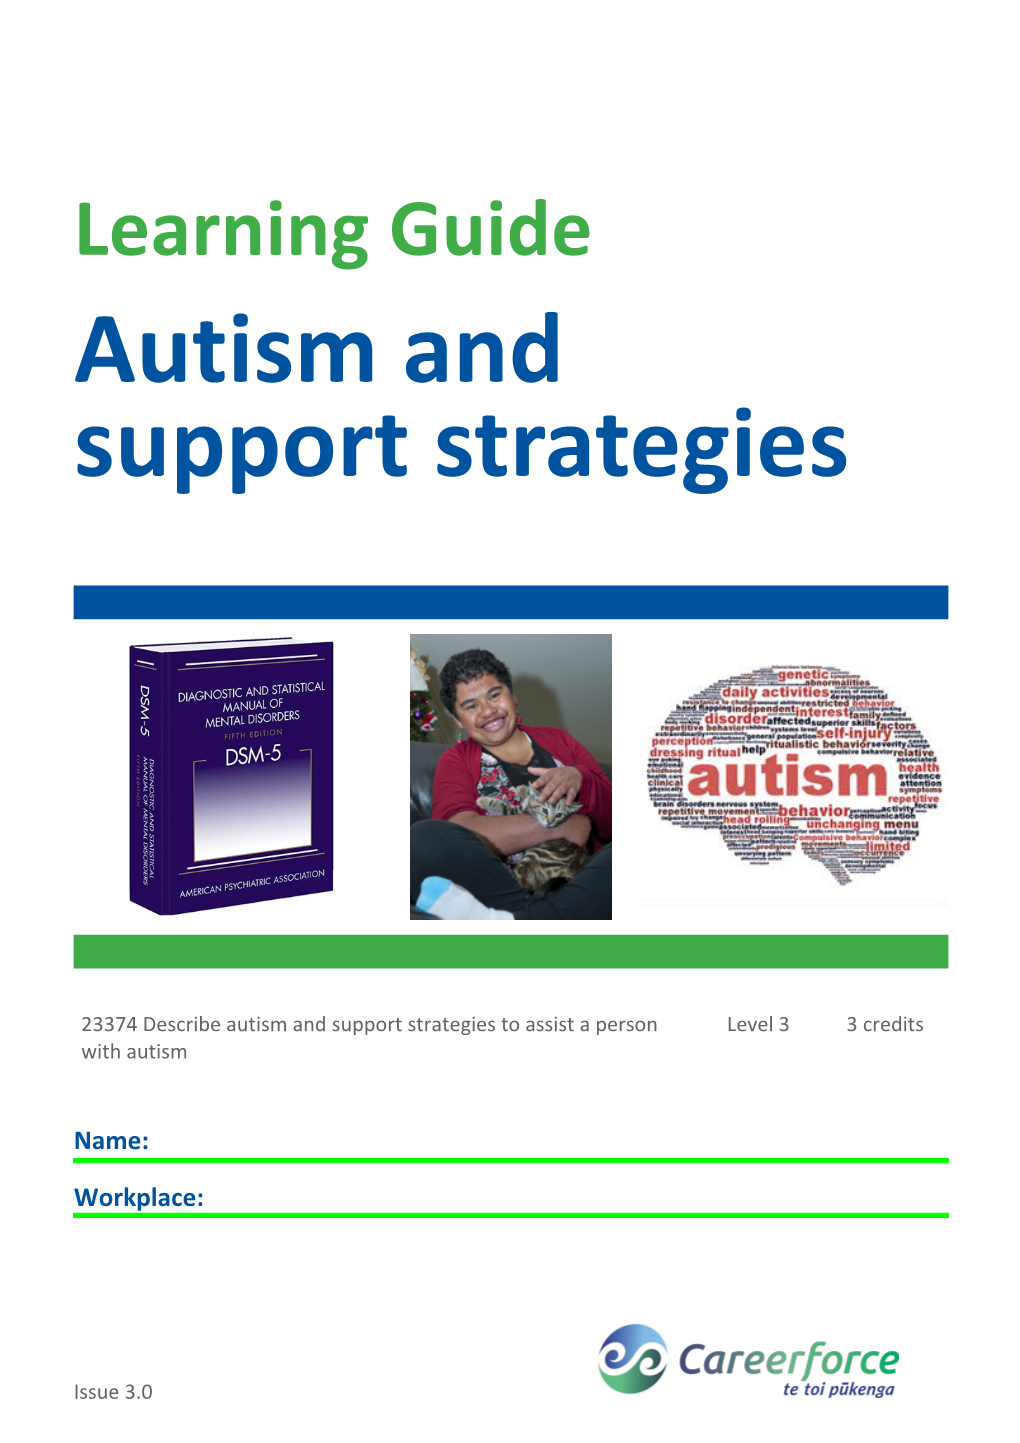 Autism and Support Strategies